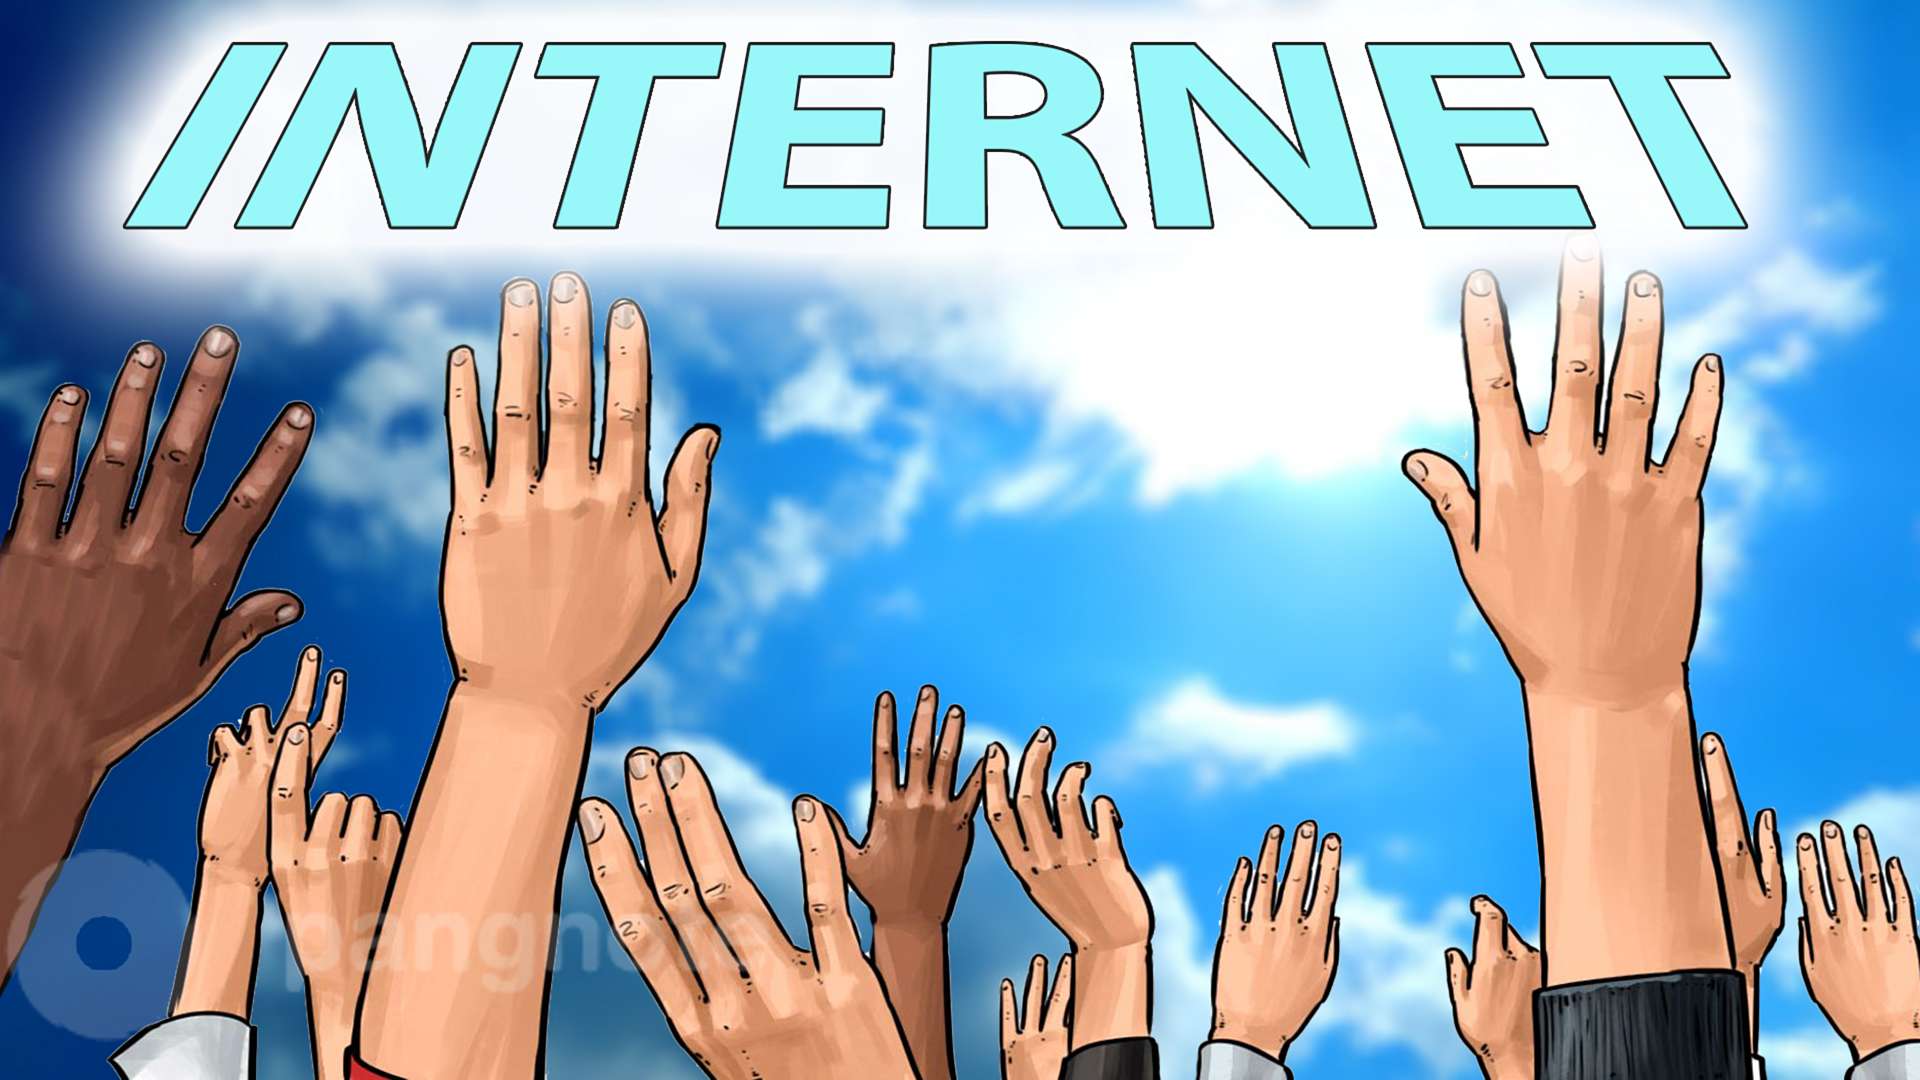 How will the new billion of users affect the development of the Internet?